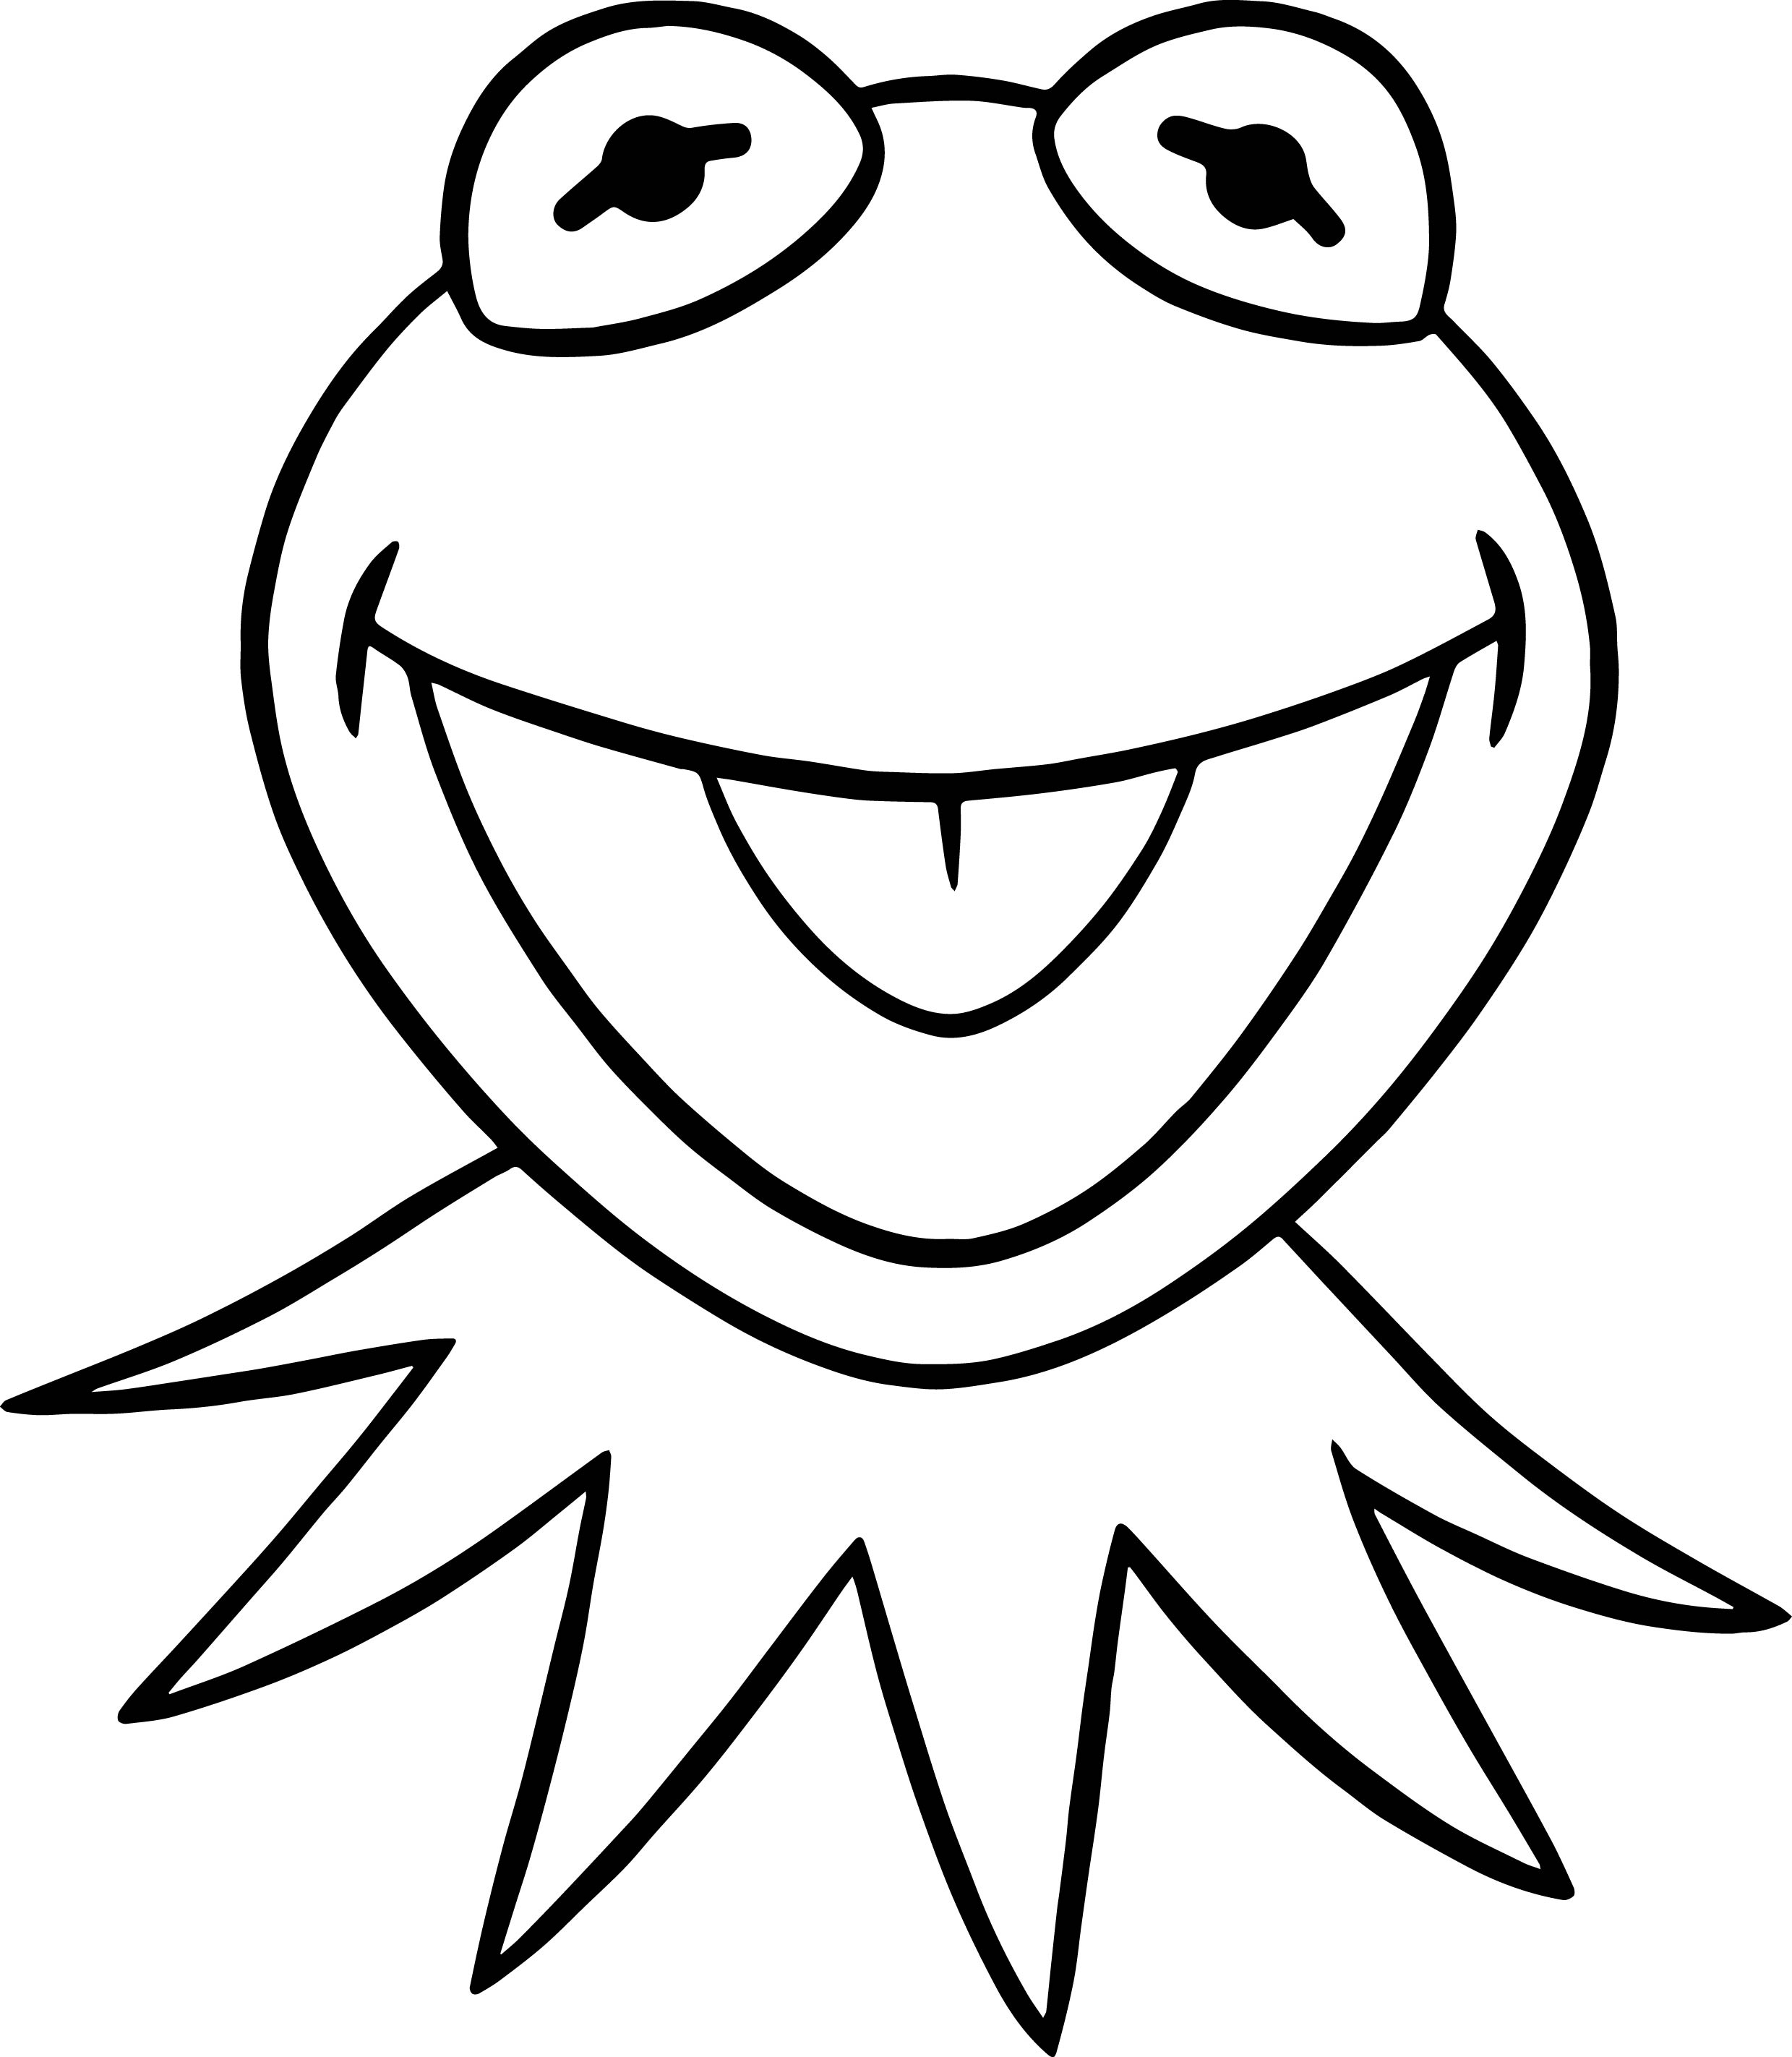 The Muppets Kermit The Happy Frog Coloring Pages | Wecoloringpage